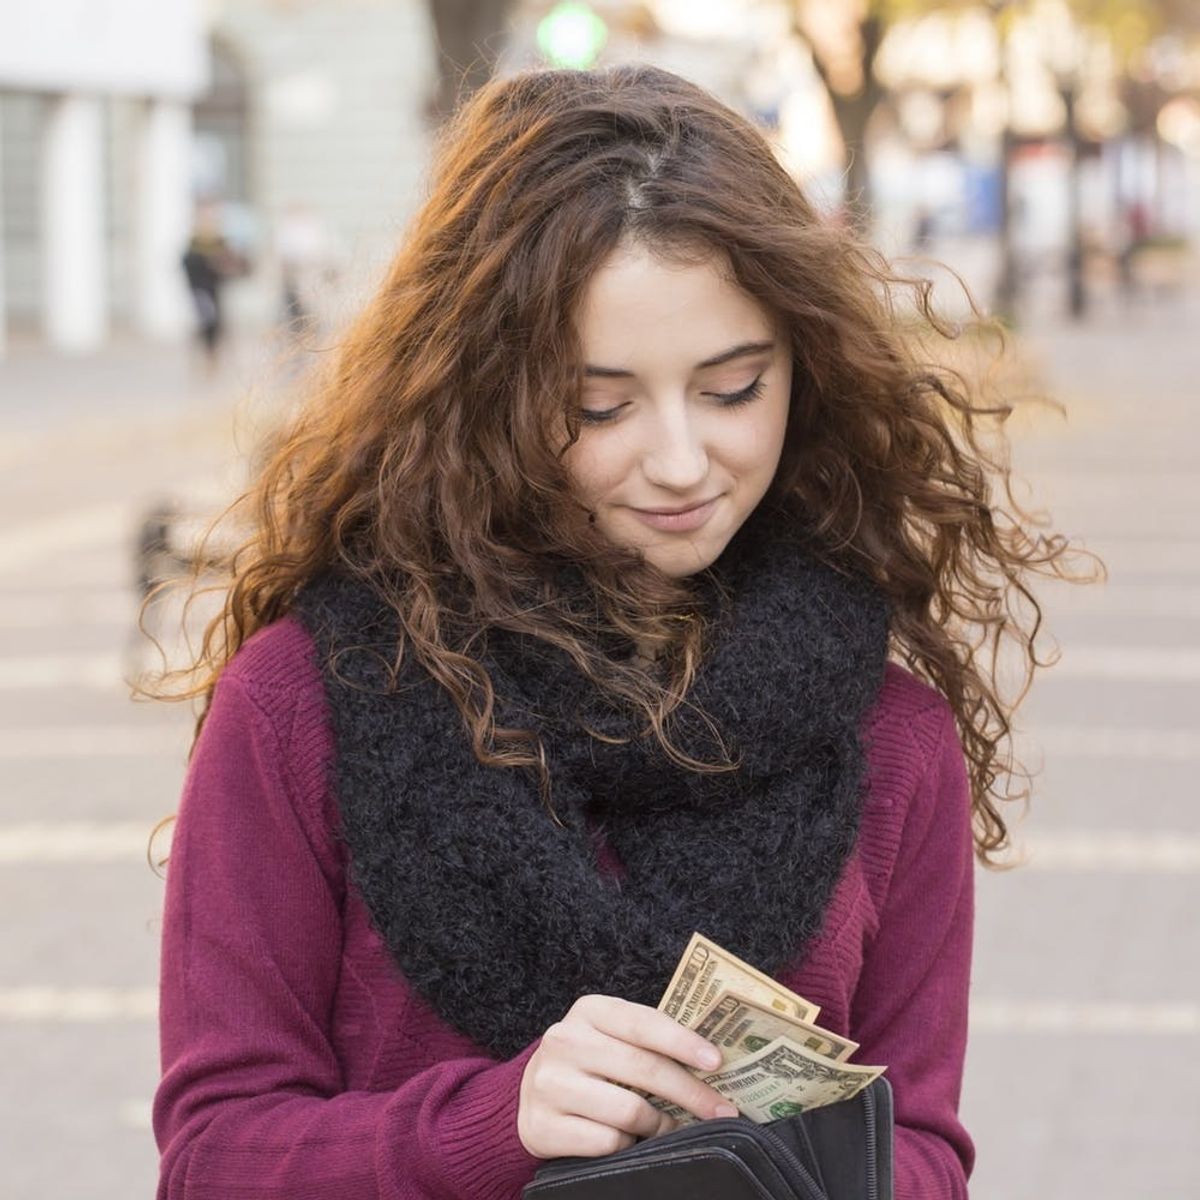 8 Things You NEED to Know About Money Before You Turn 30